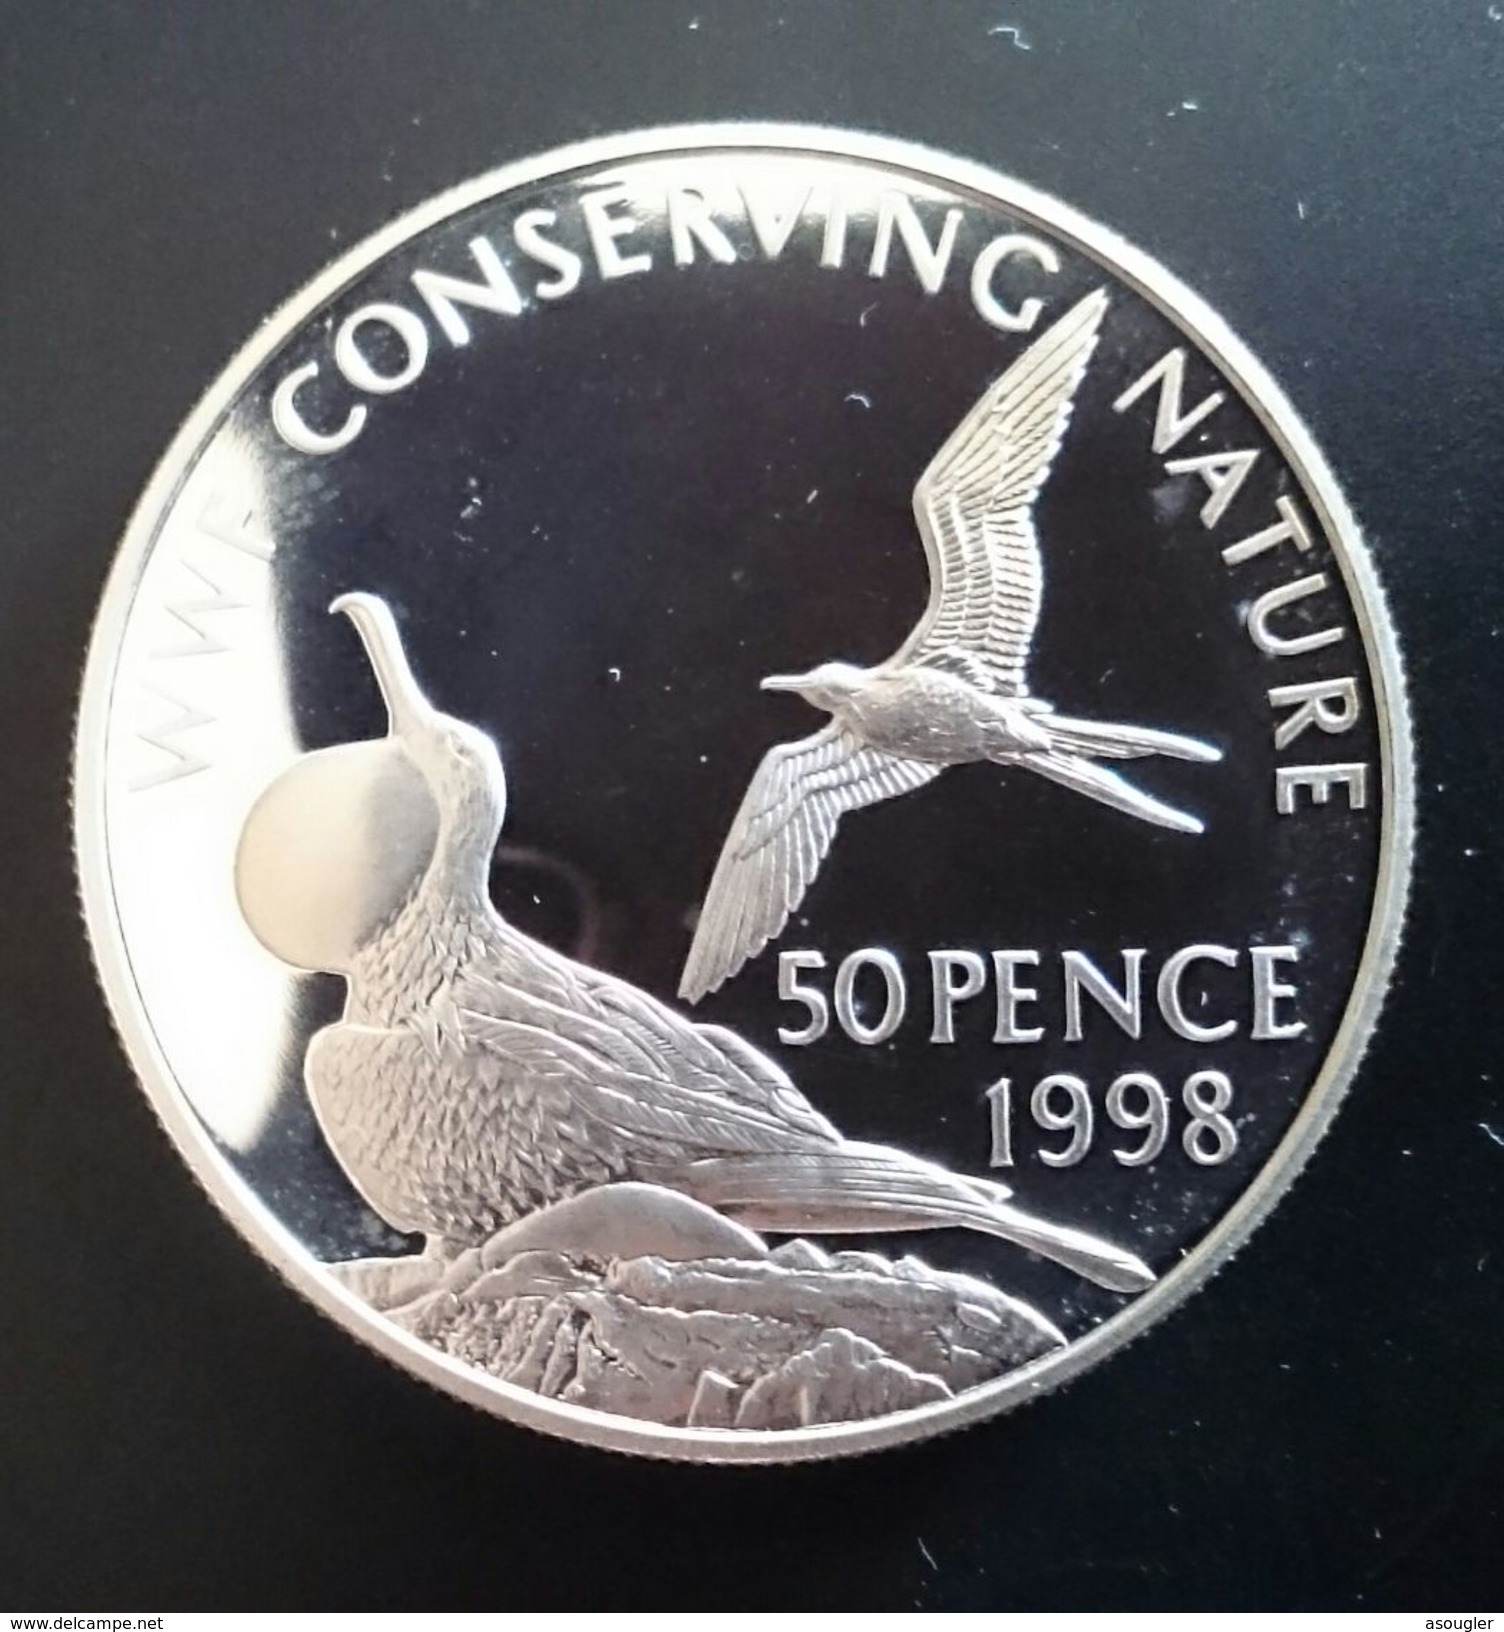 ASCENSION ISLAND 50 PENCE 1998 SILVER PROOF "World Wildlife Fund - Conserving Nature" Free Shipping Via Registered Air - Ascension